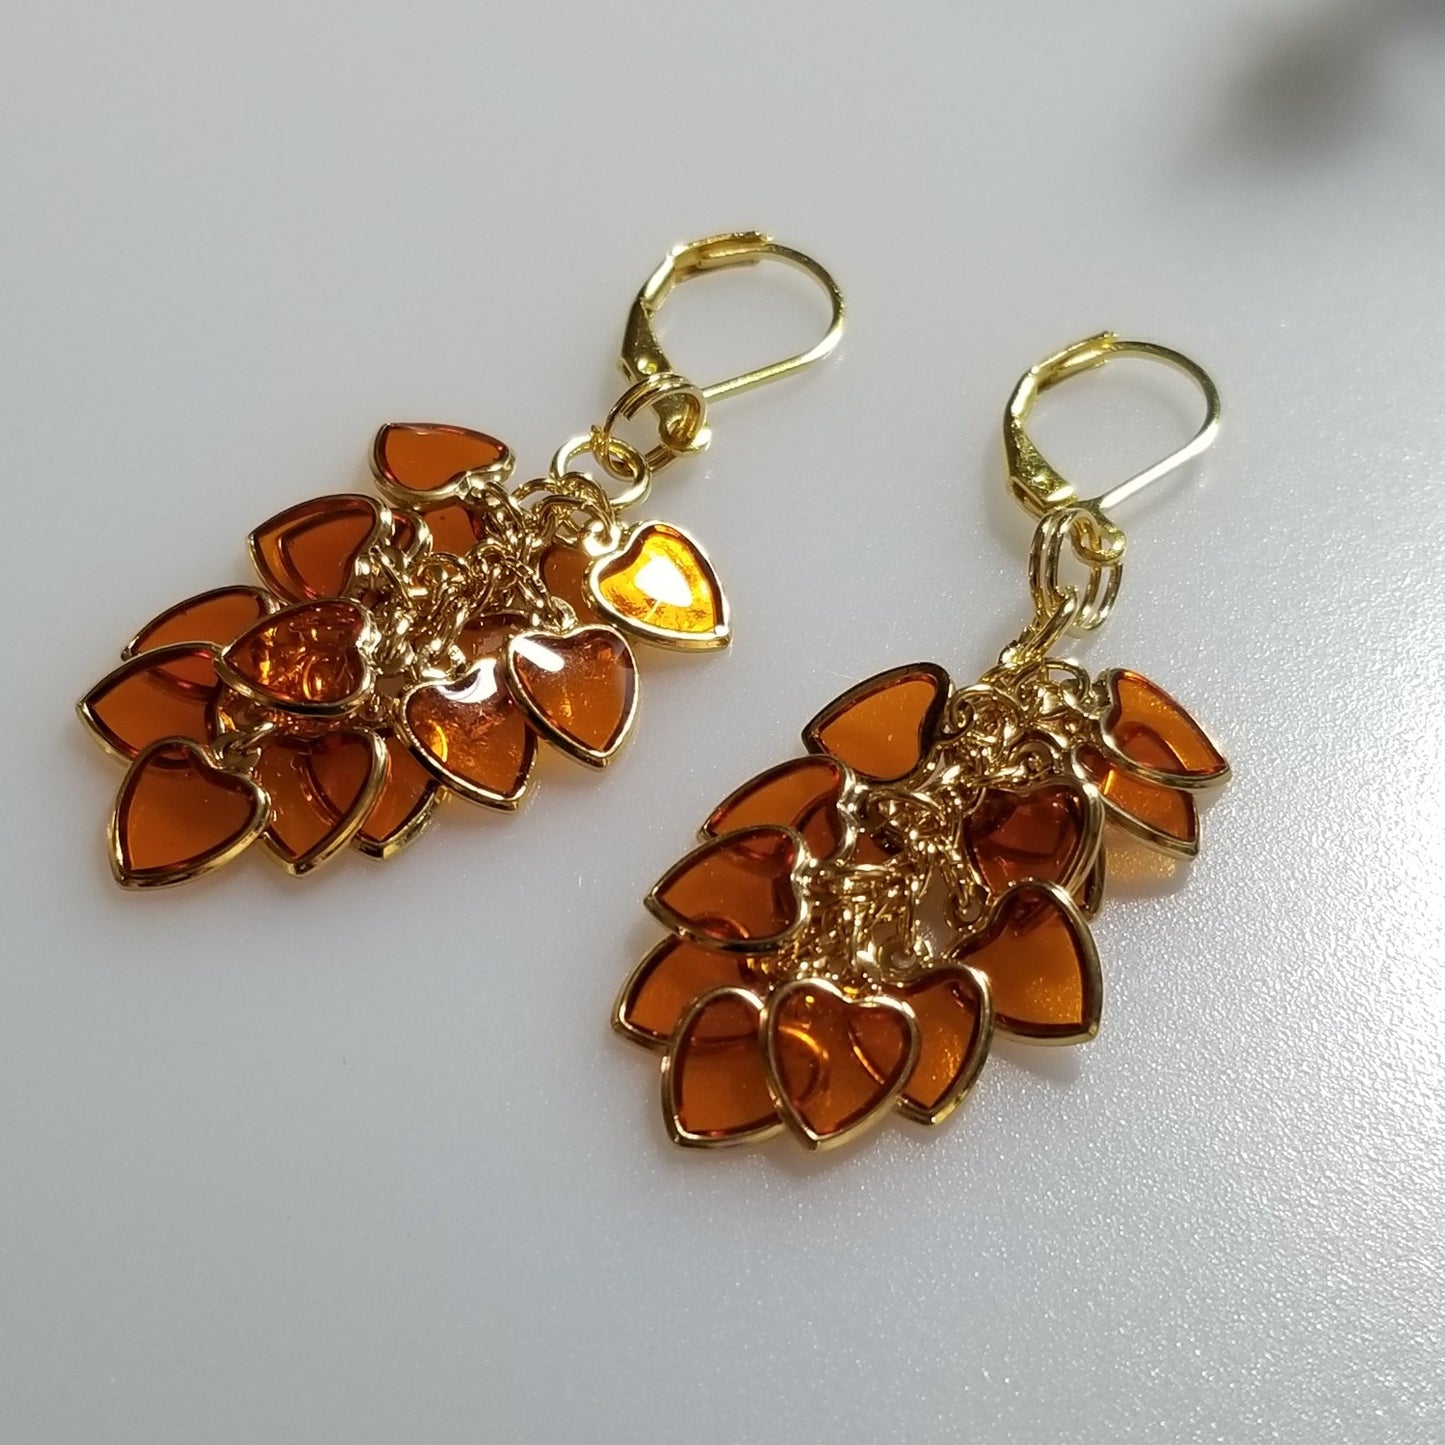 Autumn Earrings in Gold, Amber Hearts